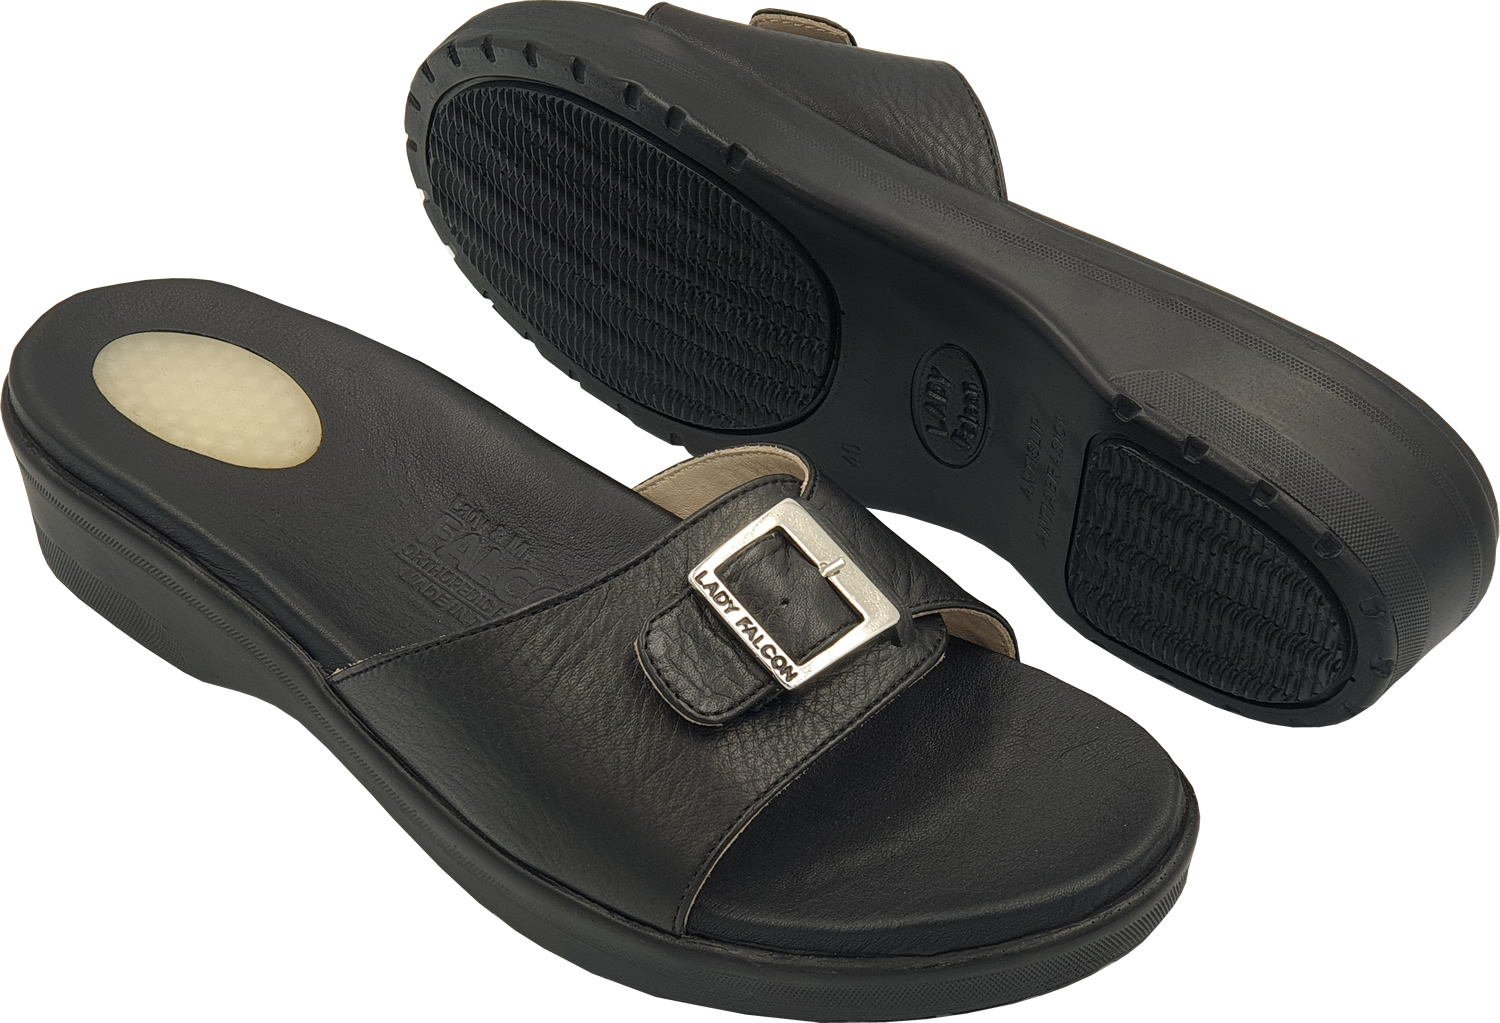 Tata 1mg Ortho Slippers - Men Size 10 Black: Buy packet of 1 Unit at best  price in India | 1mg